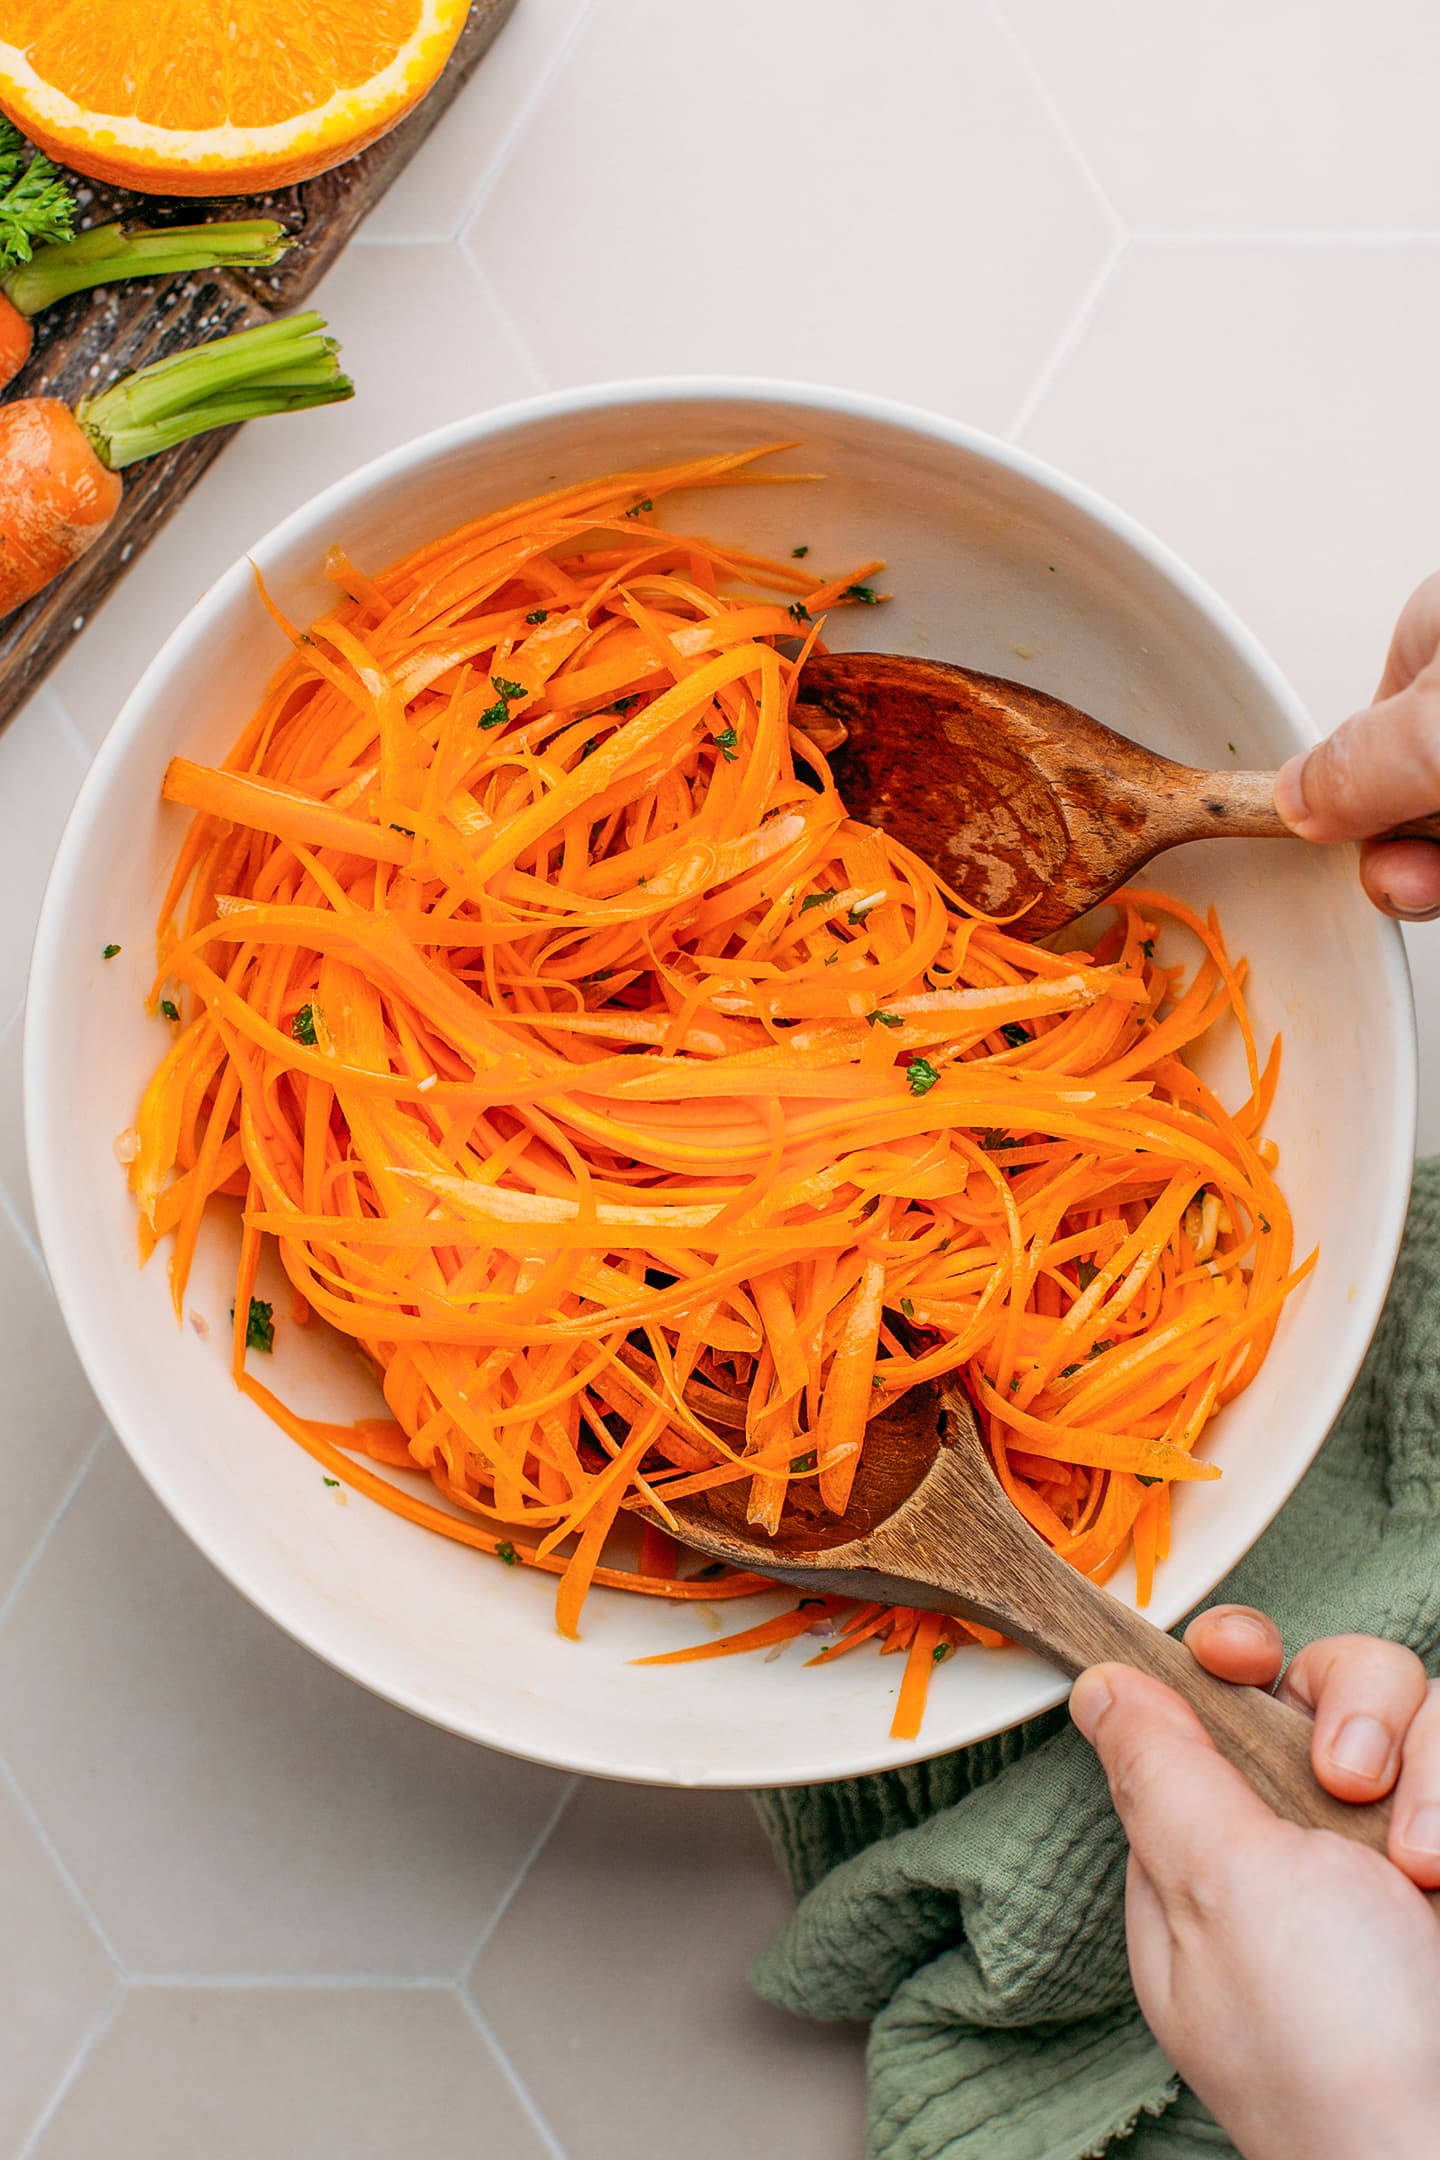 Tossing grated carrots with olive oil and lemon juice.